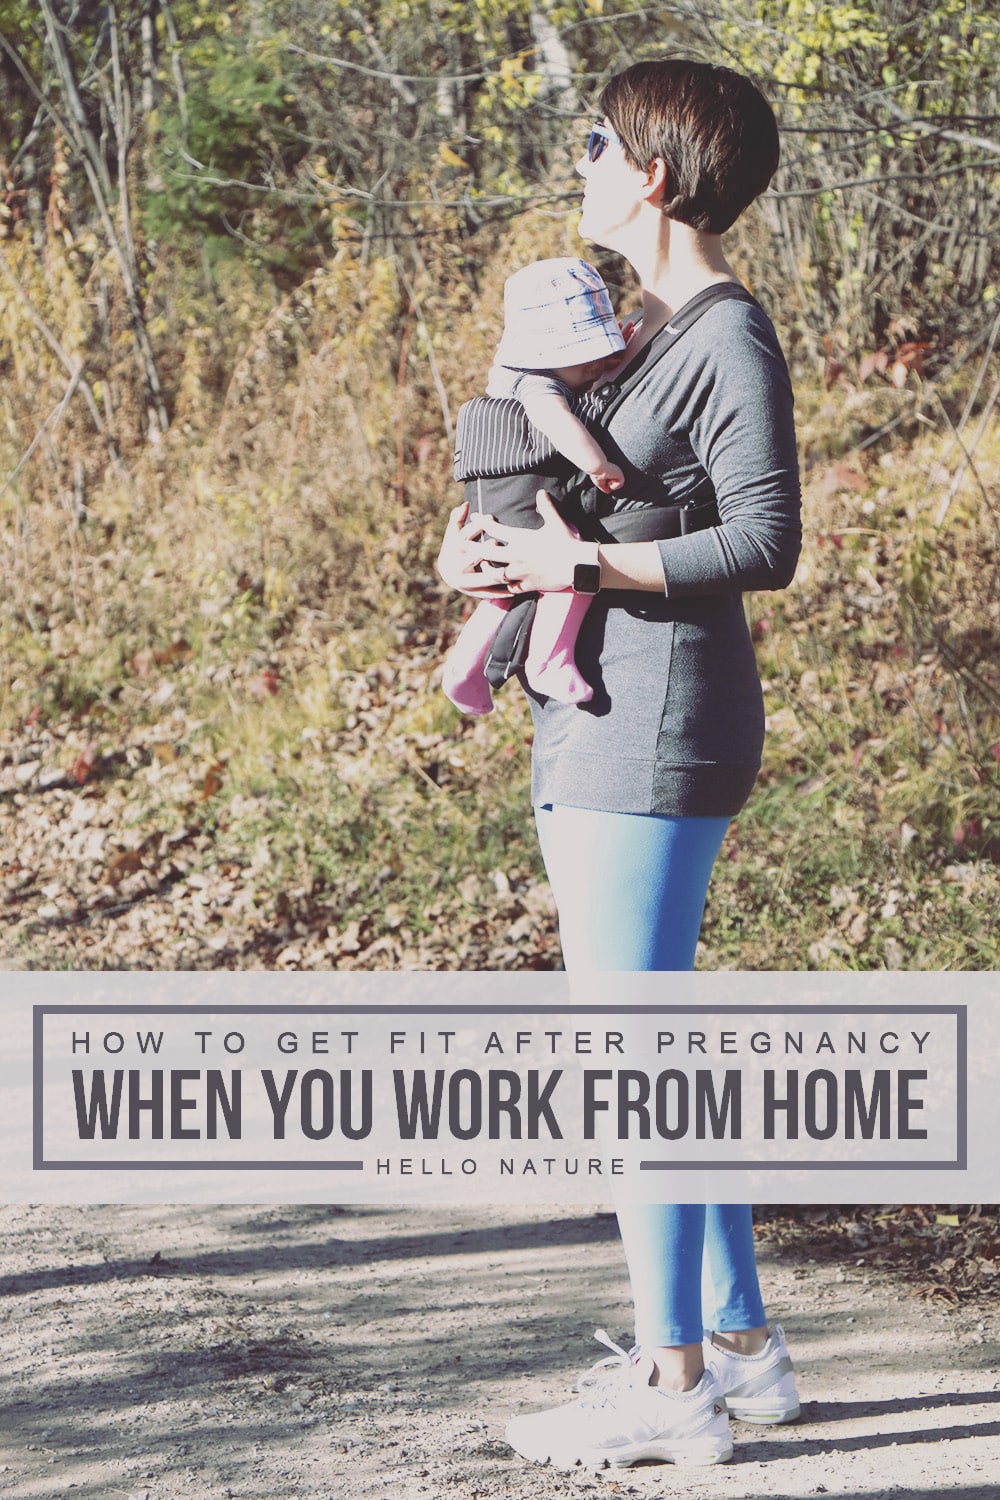 This guide on how to get fit after pregnancy when you work at home provides five simple things you can do today to get moving!